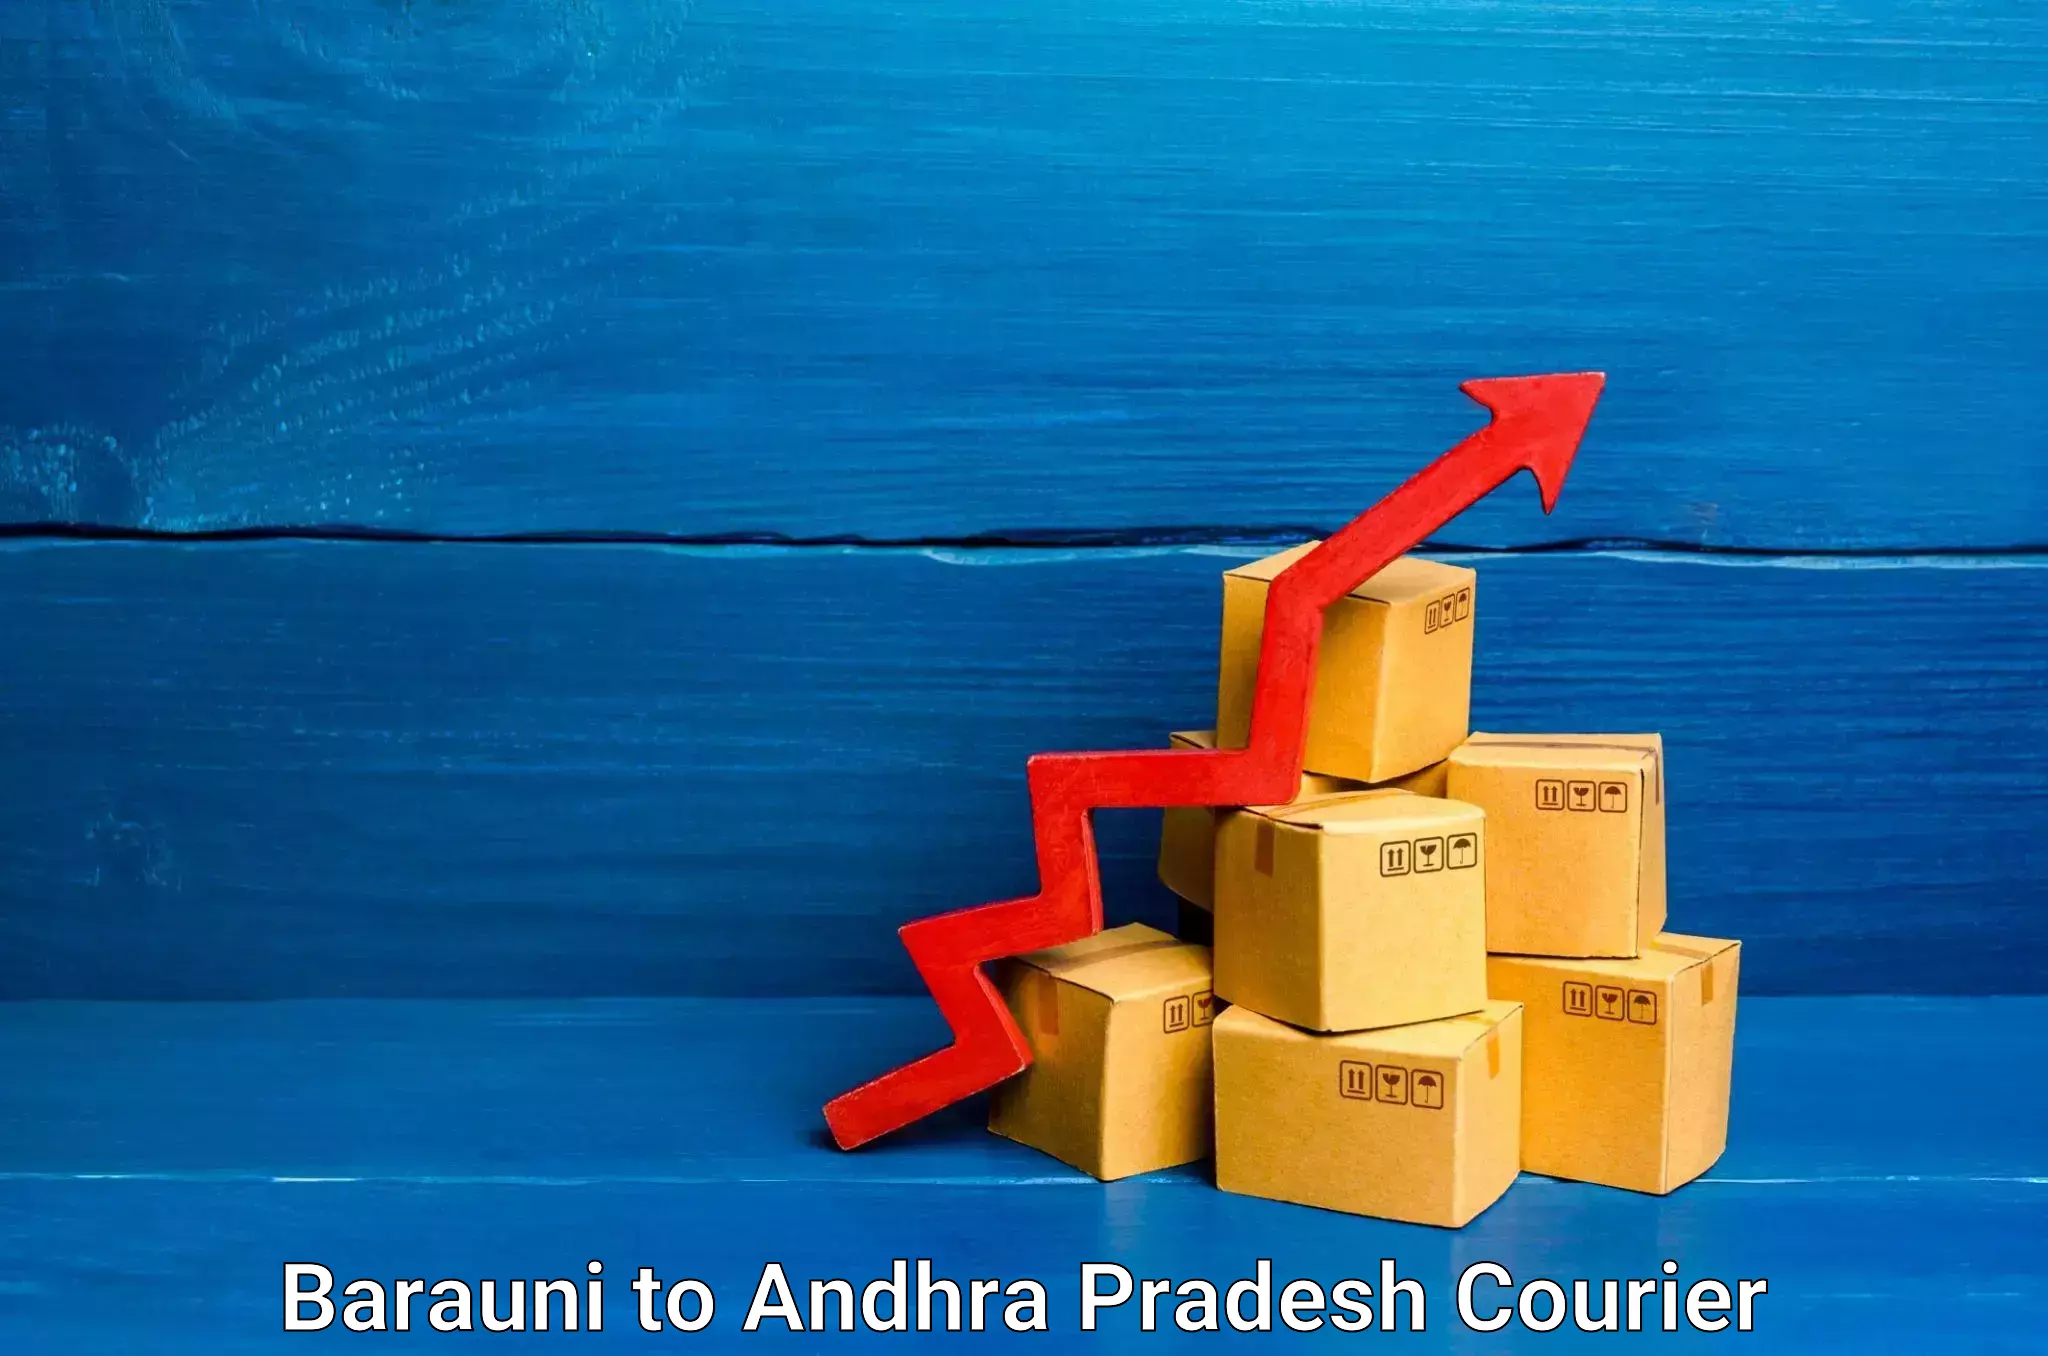 Furniture moving specialists Barauni to Andhra Pradesh